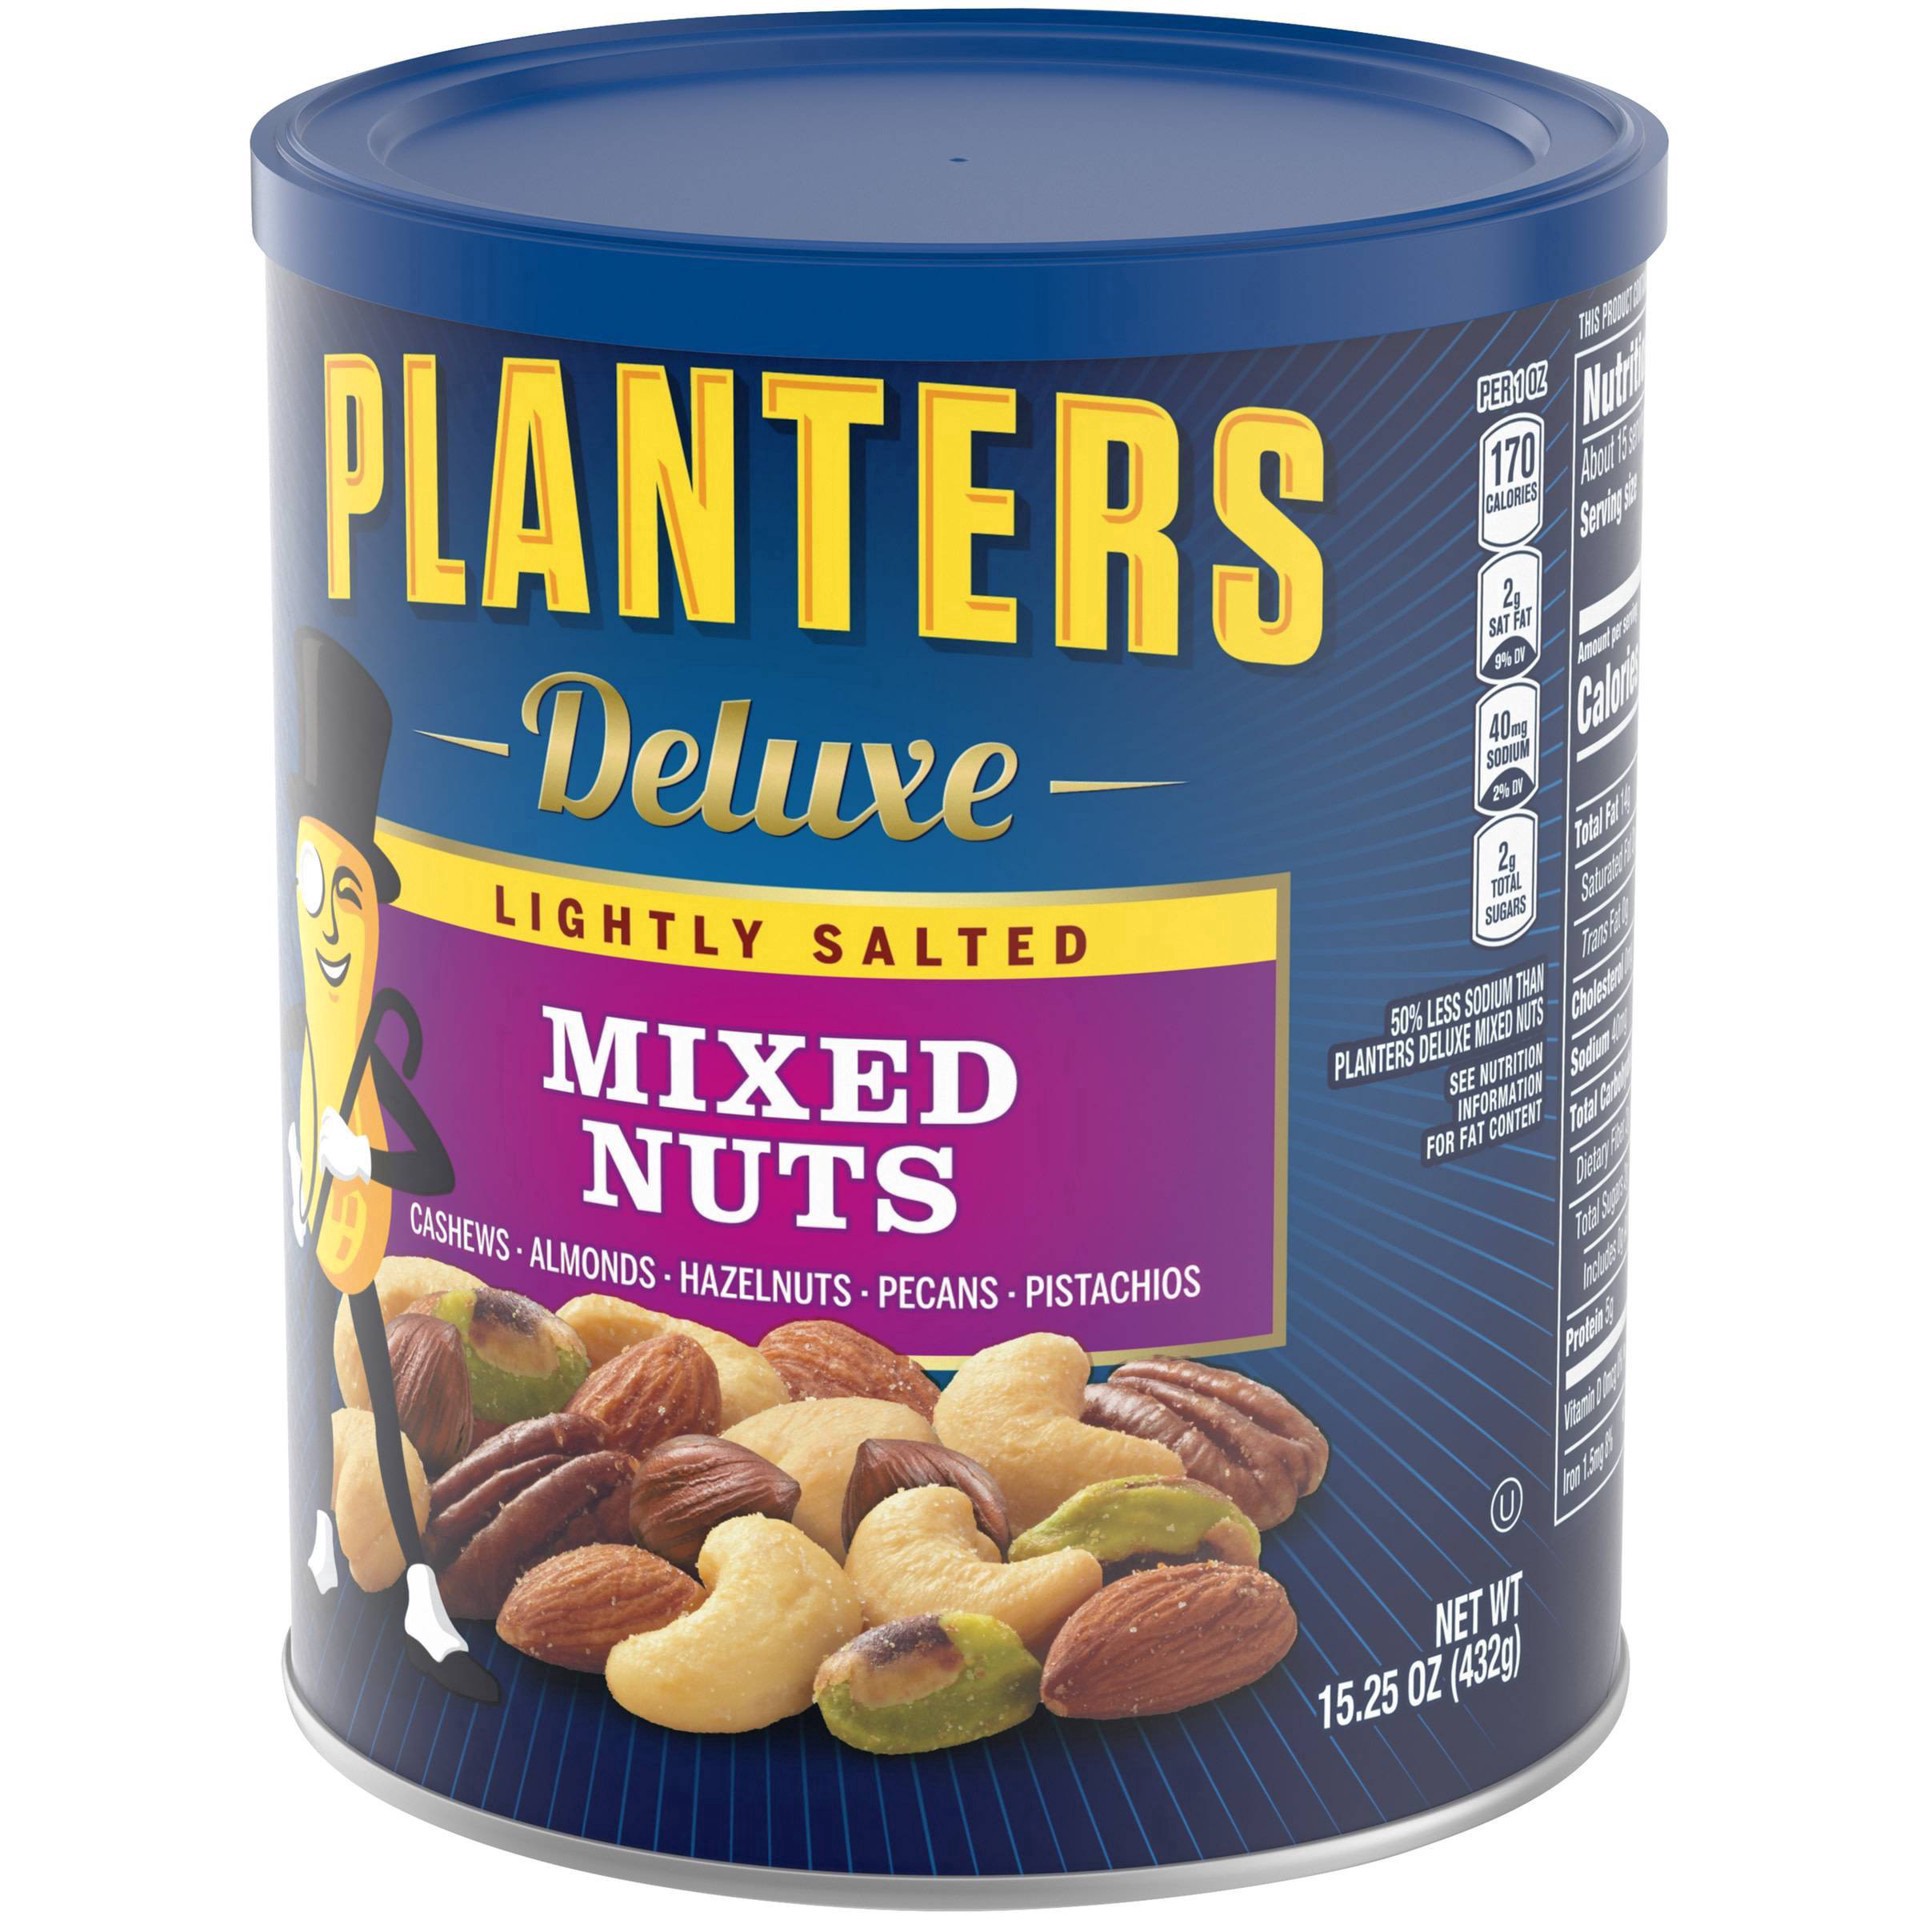 slide 29 of 46, Planters Deluxe Lightly Salted Mixed Nuts 15.25 oz, 15.25 oz